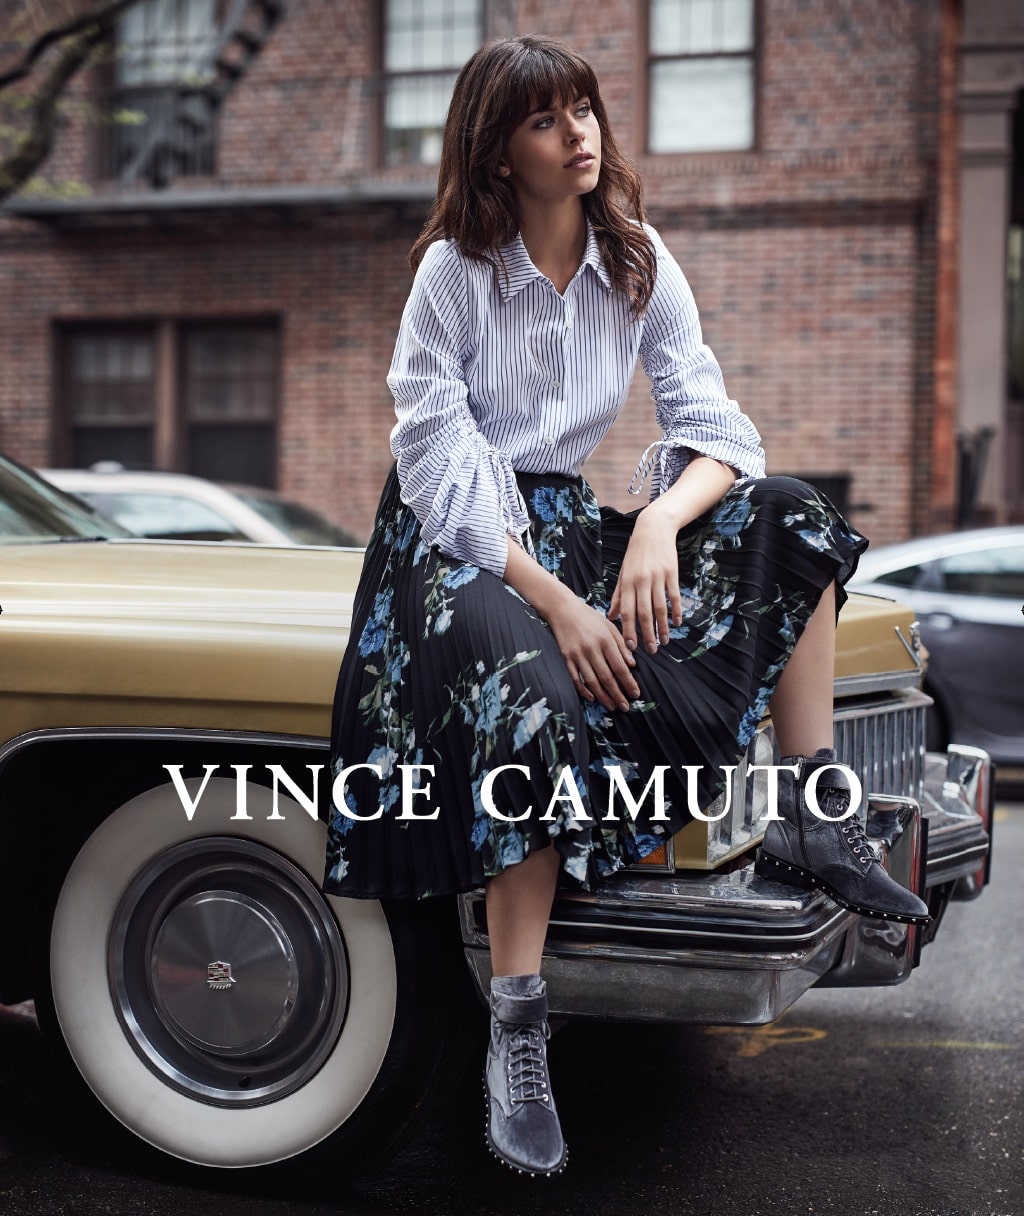 Vince Camuto's Widow to Become Chief Creative Officer of Camuto Group -  Fashionista